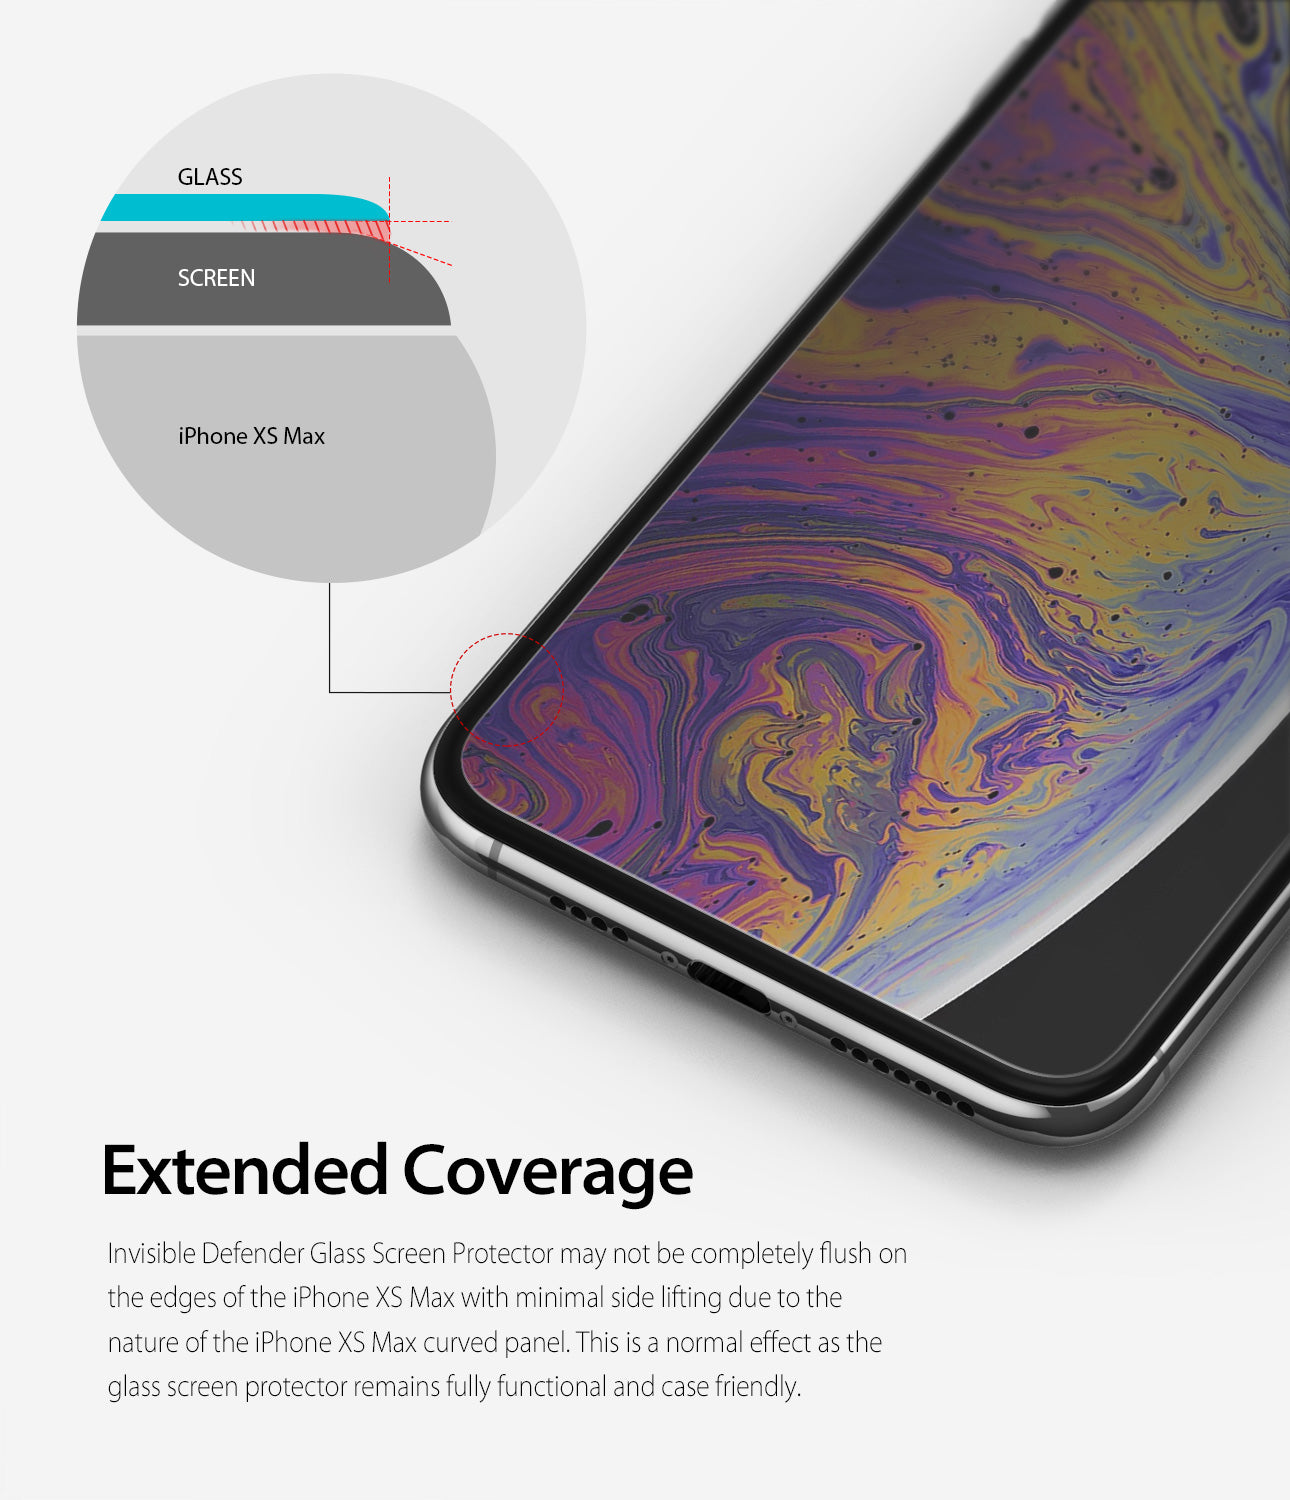 iPhone XS Max Screen Protector | Invisible Defender Glass - Extended Coverage